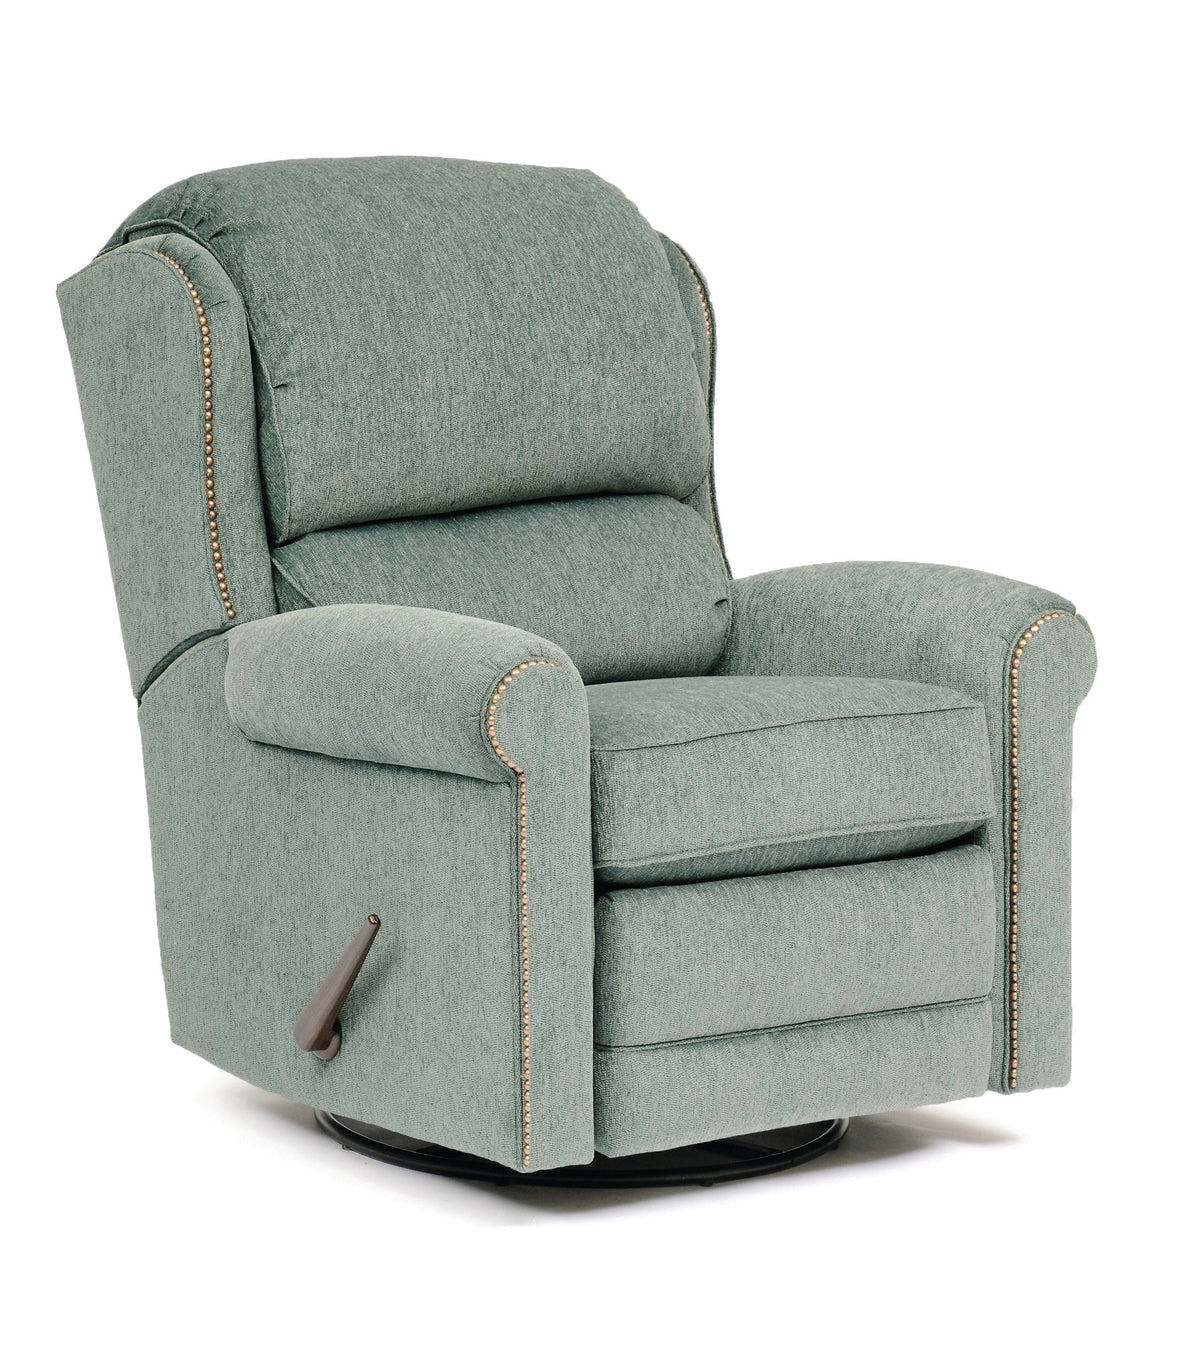 720 Style Swivel Glider Reclining Chair